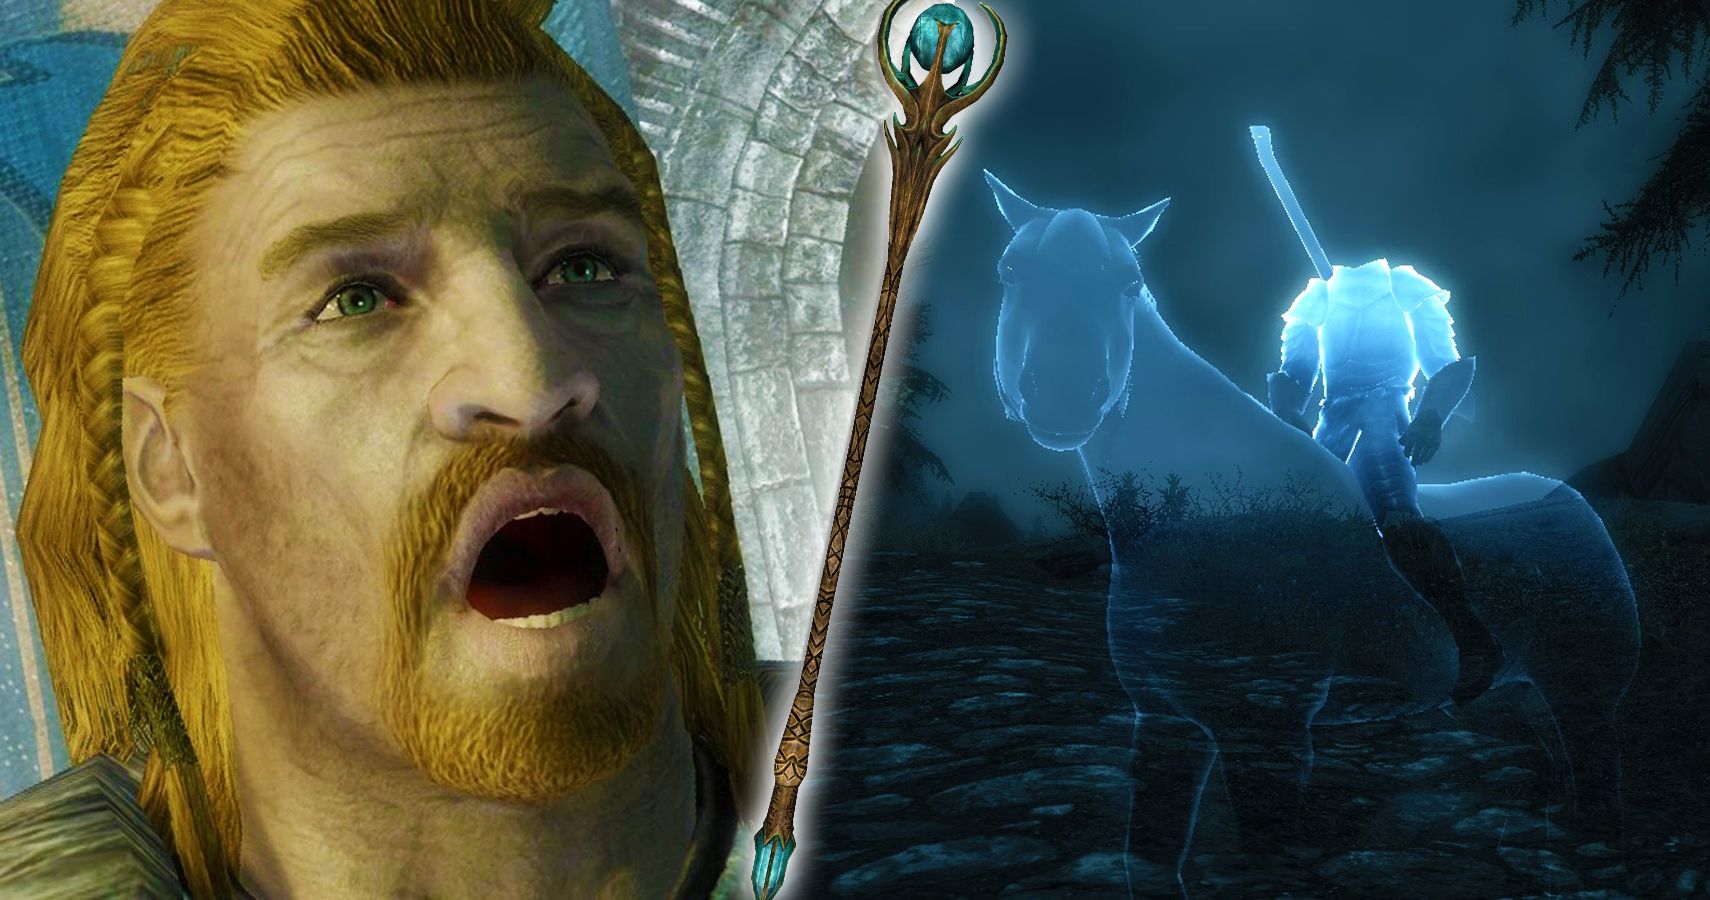 30 Little Known Details About Skyrim That Are Very Mysterious